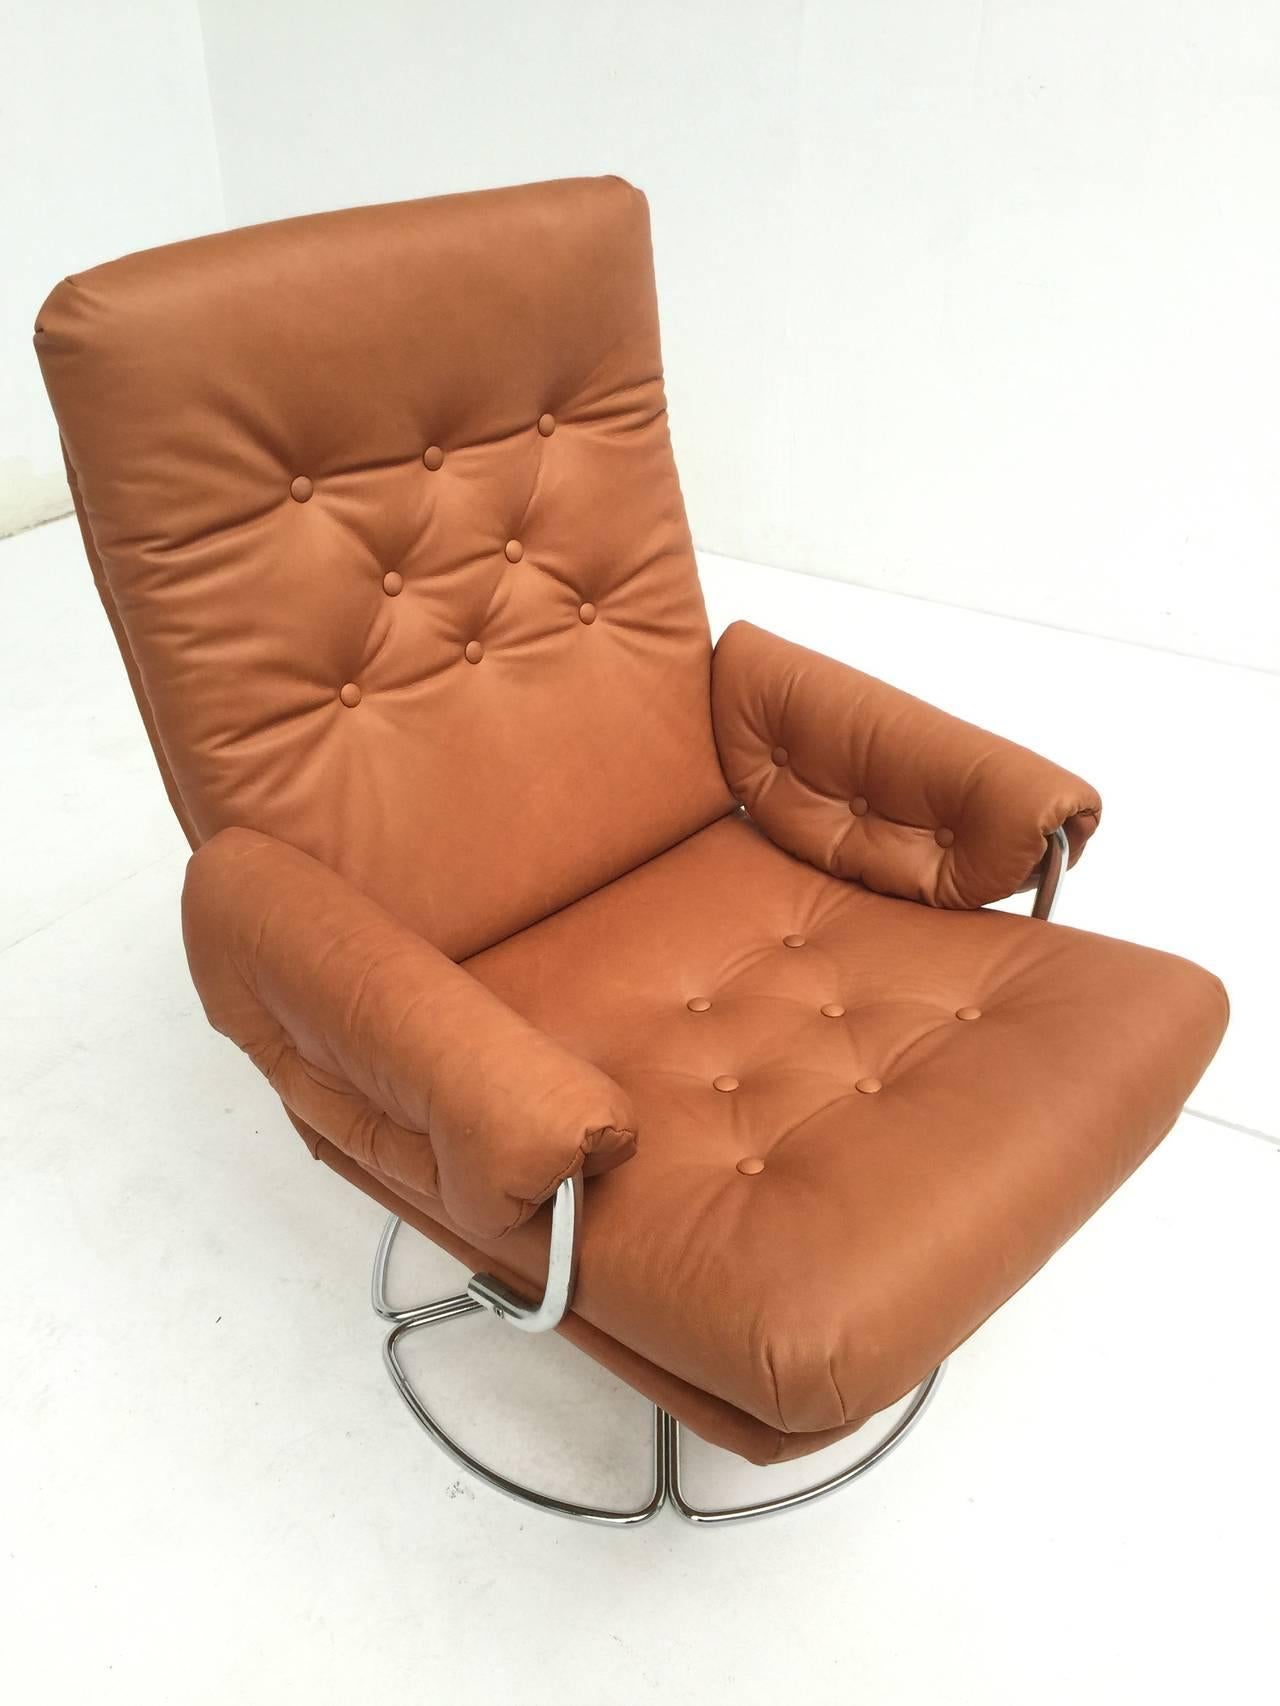 This swivelling easy chair is a crossover model of the famous Jetson chair and the Karin model by Swedish designer Bruno Mathsson for DUX

It is re-upholstered with a top quality smooth and soft aniline leather that will fetch a beautiful patina